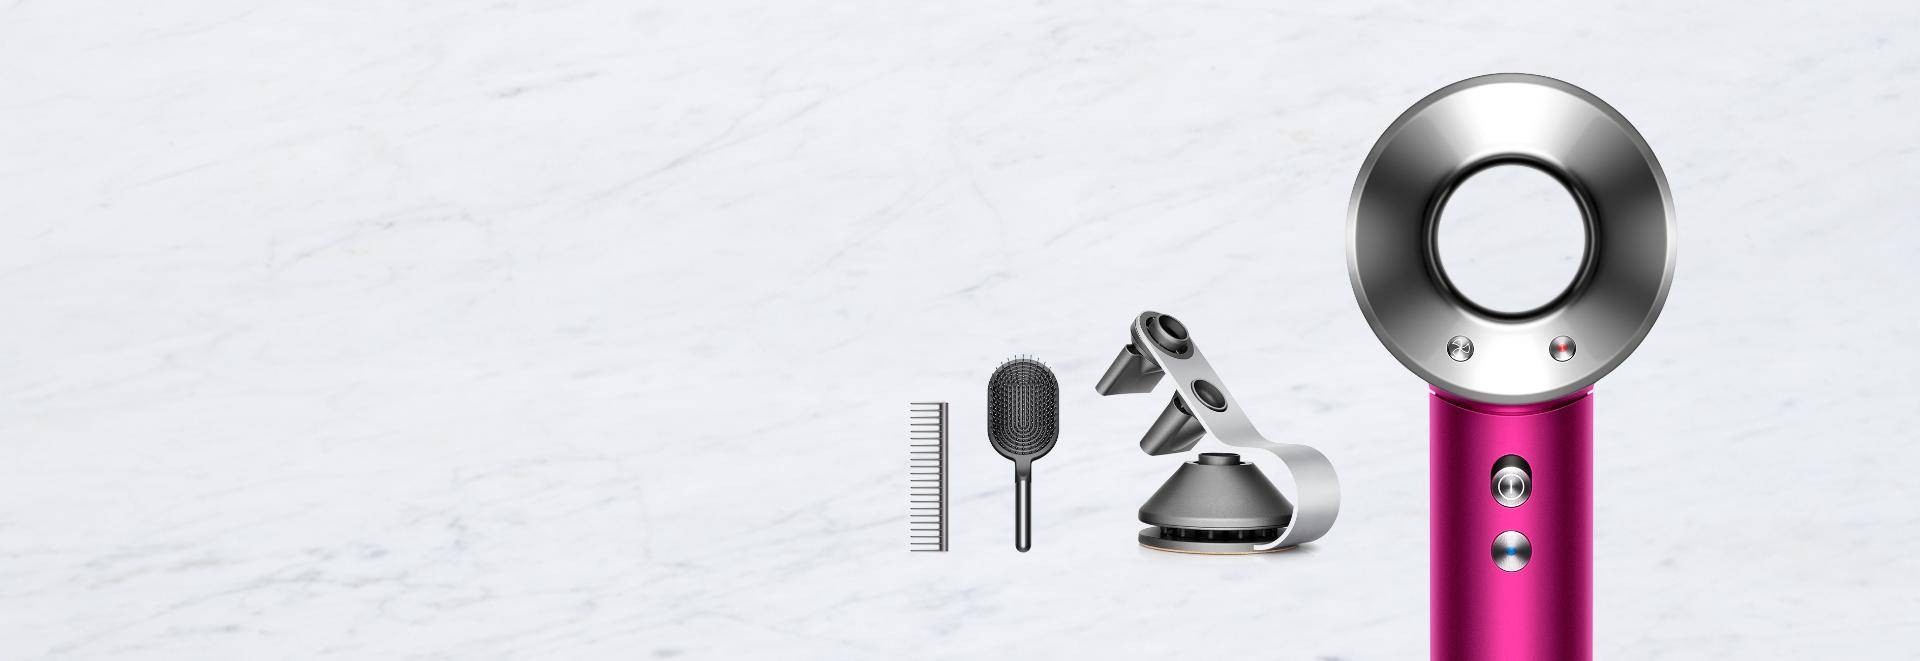 Dyson Supersonic™ hair dryer with stand and brushes